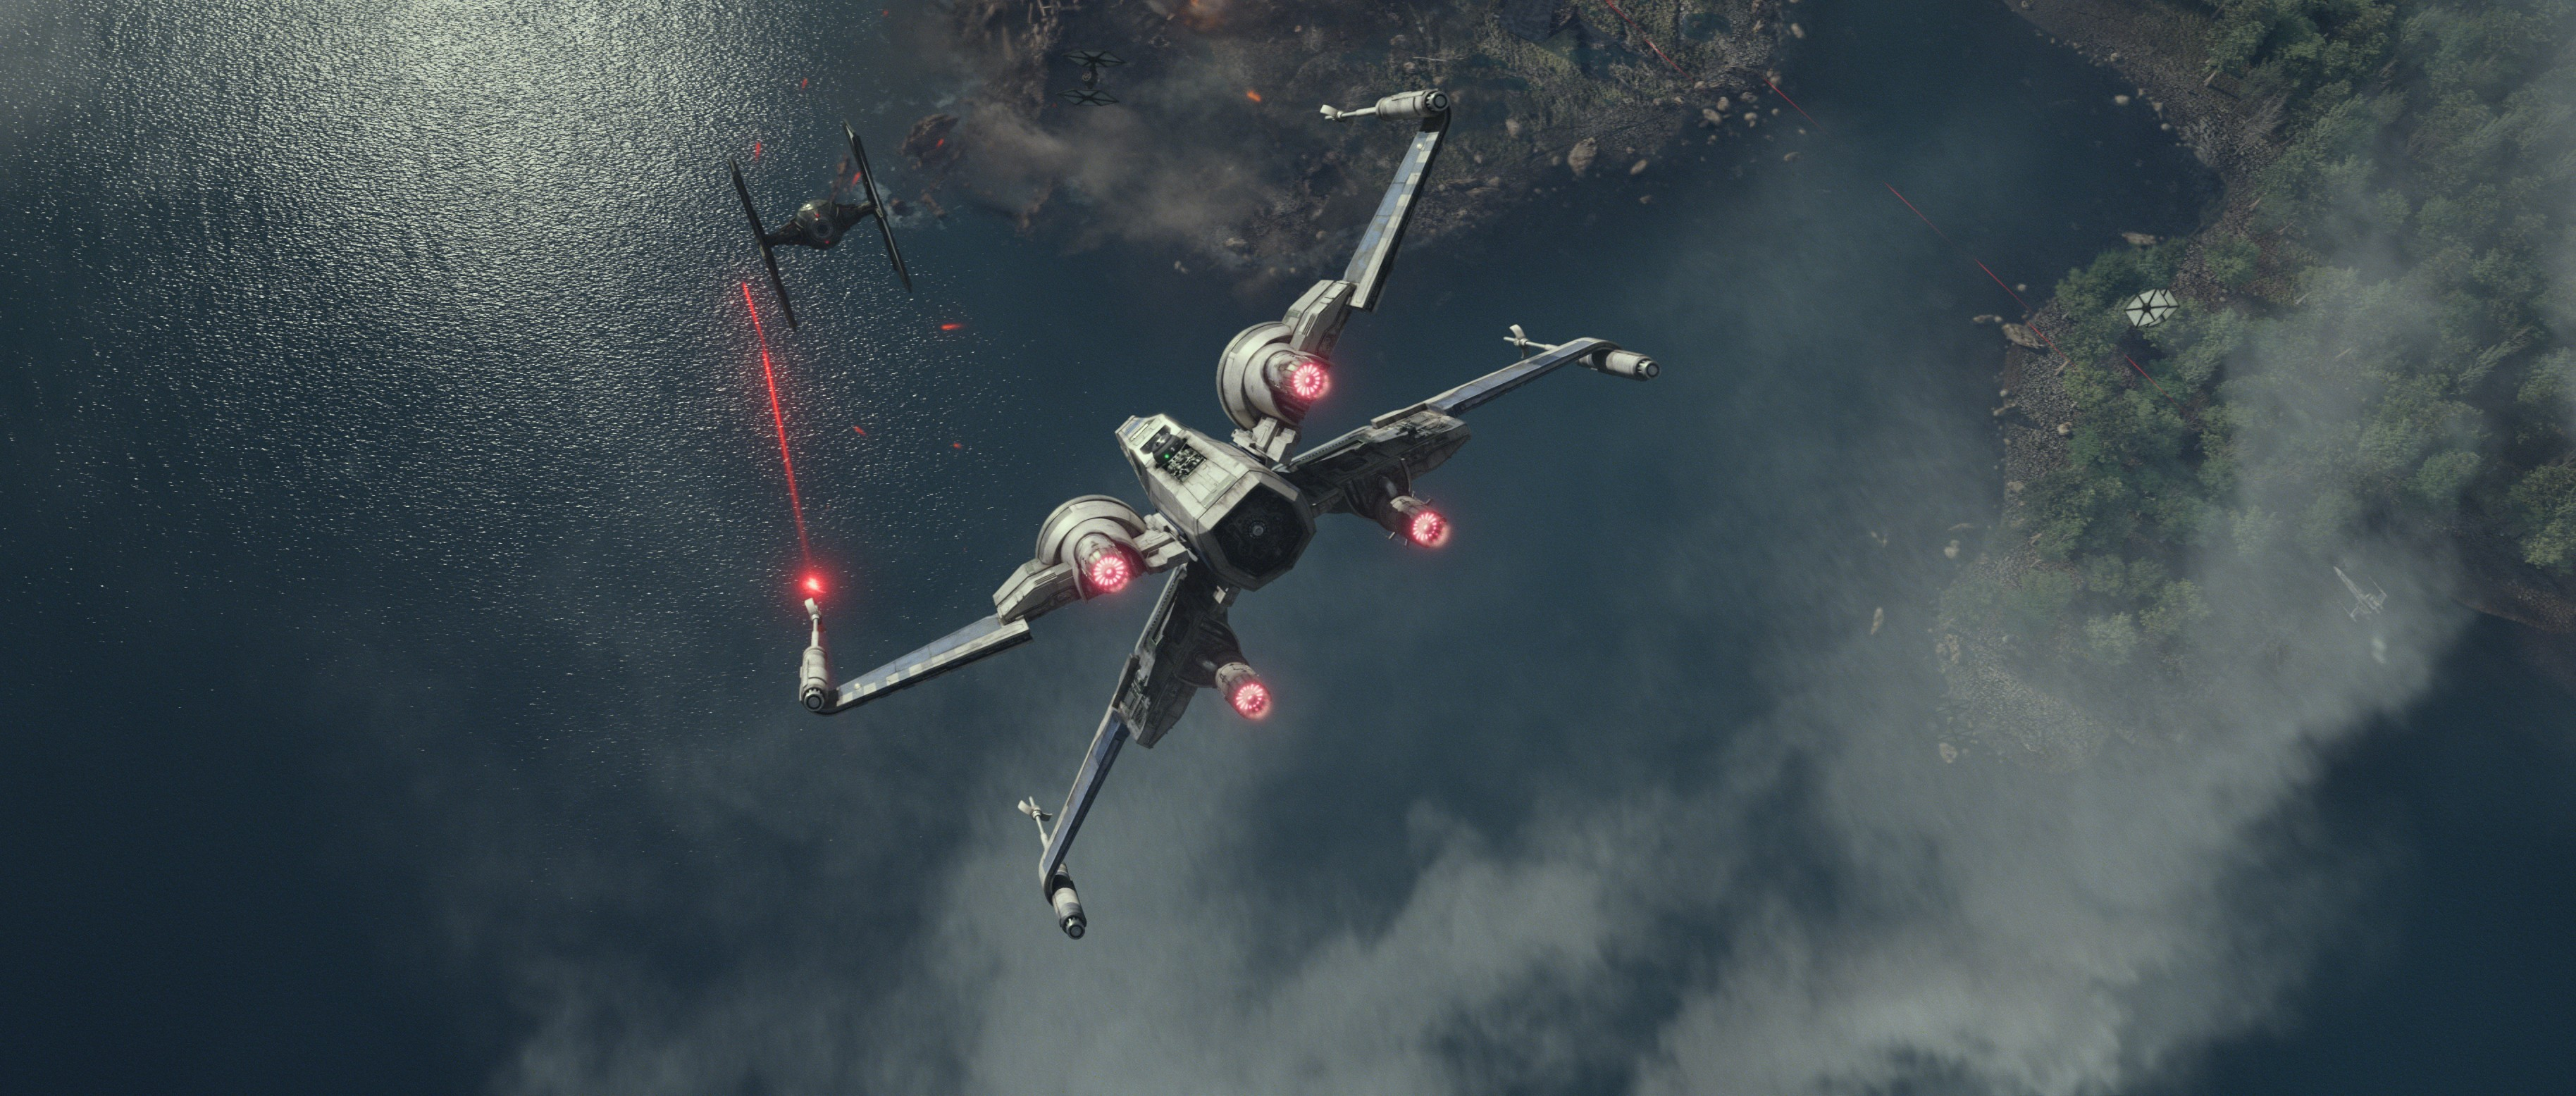 3656x1556 Wallpaper : Star Wars The Force Awakens, X wing, TIE Fighter, movies adoreth 815312 HD Wallpapers